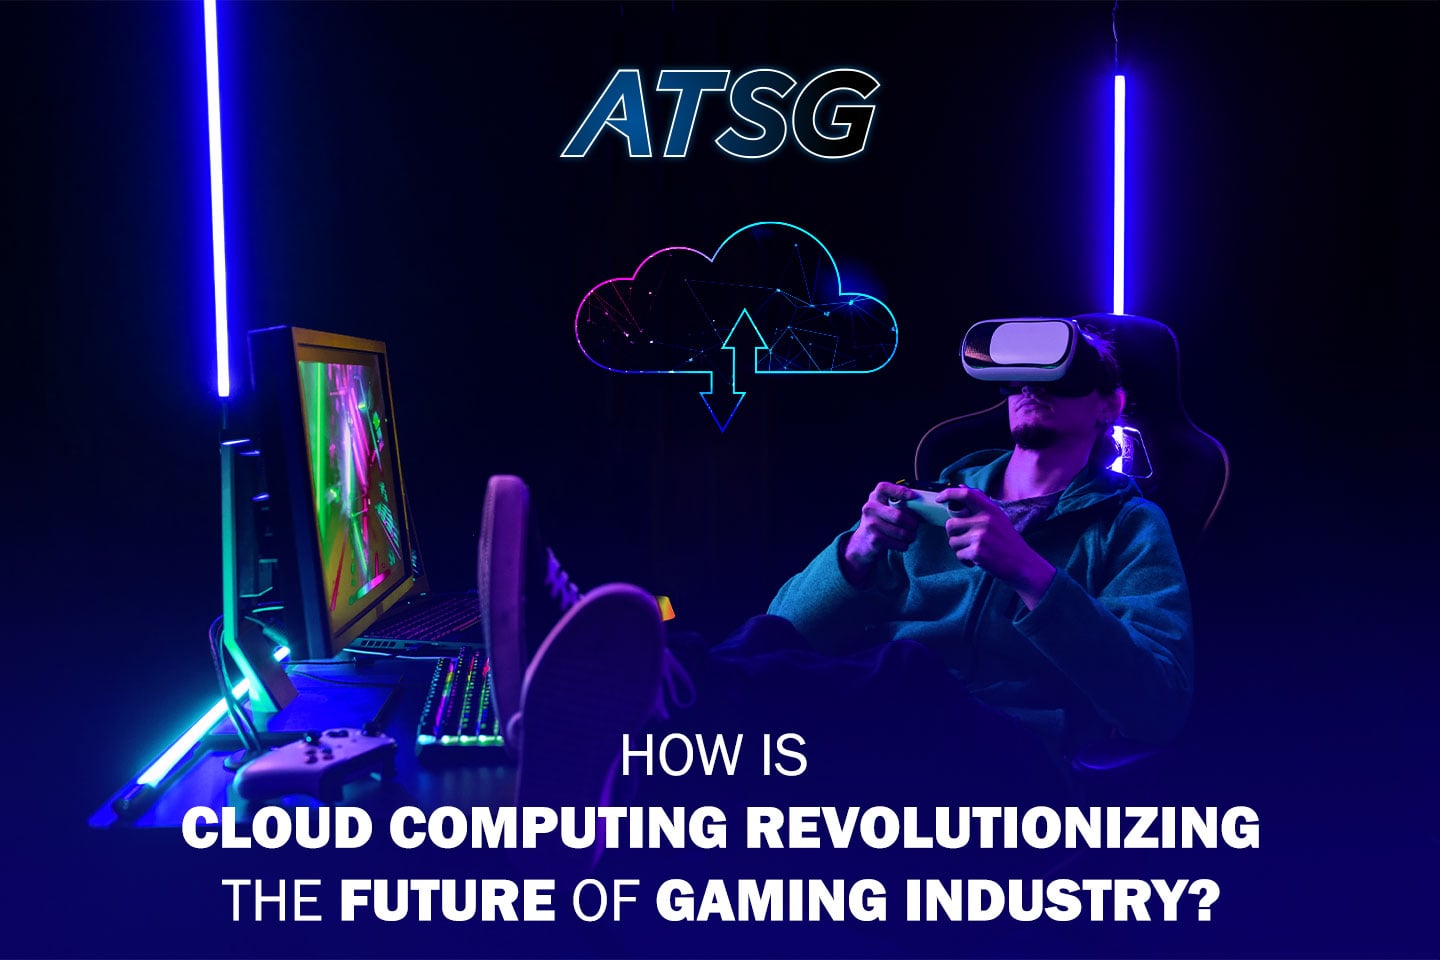 Cloud gaming could revolutionize the industry